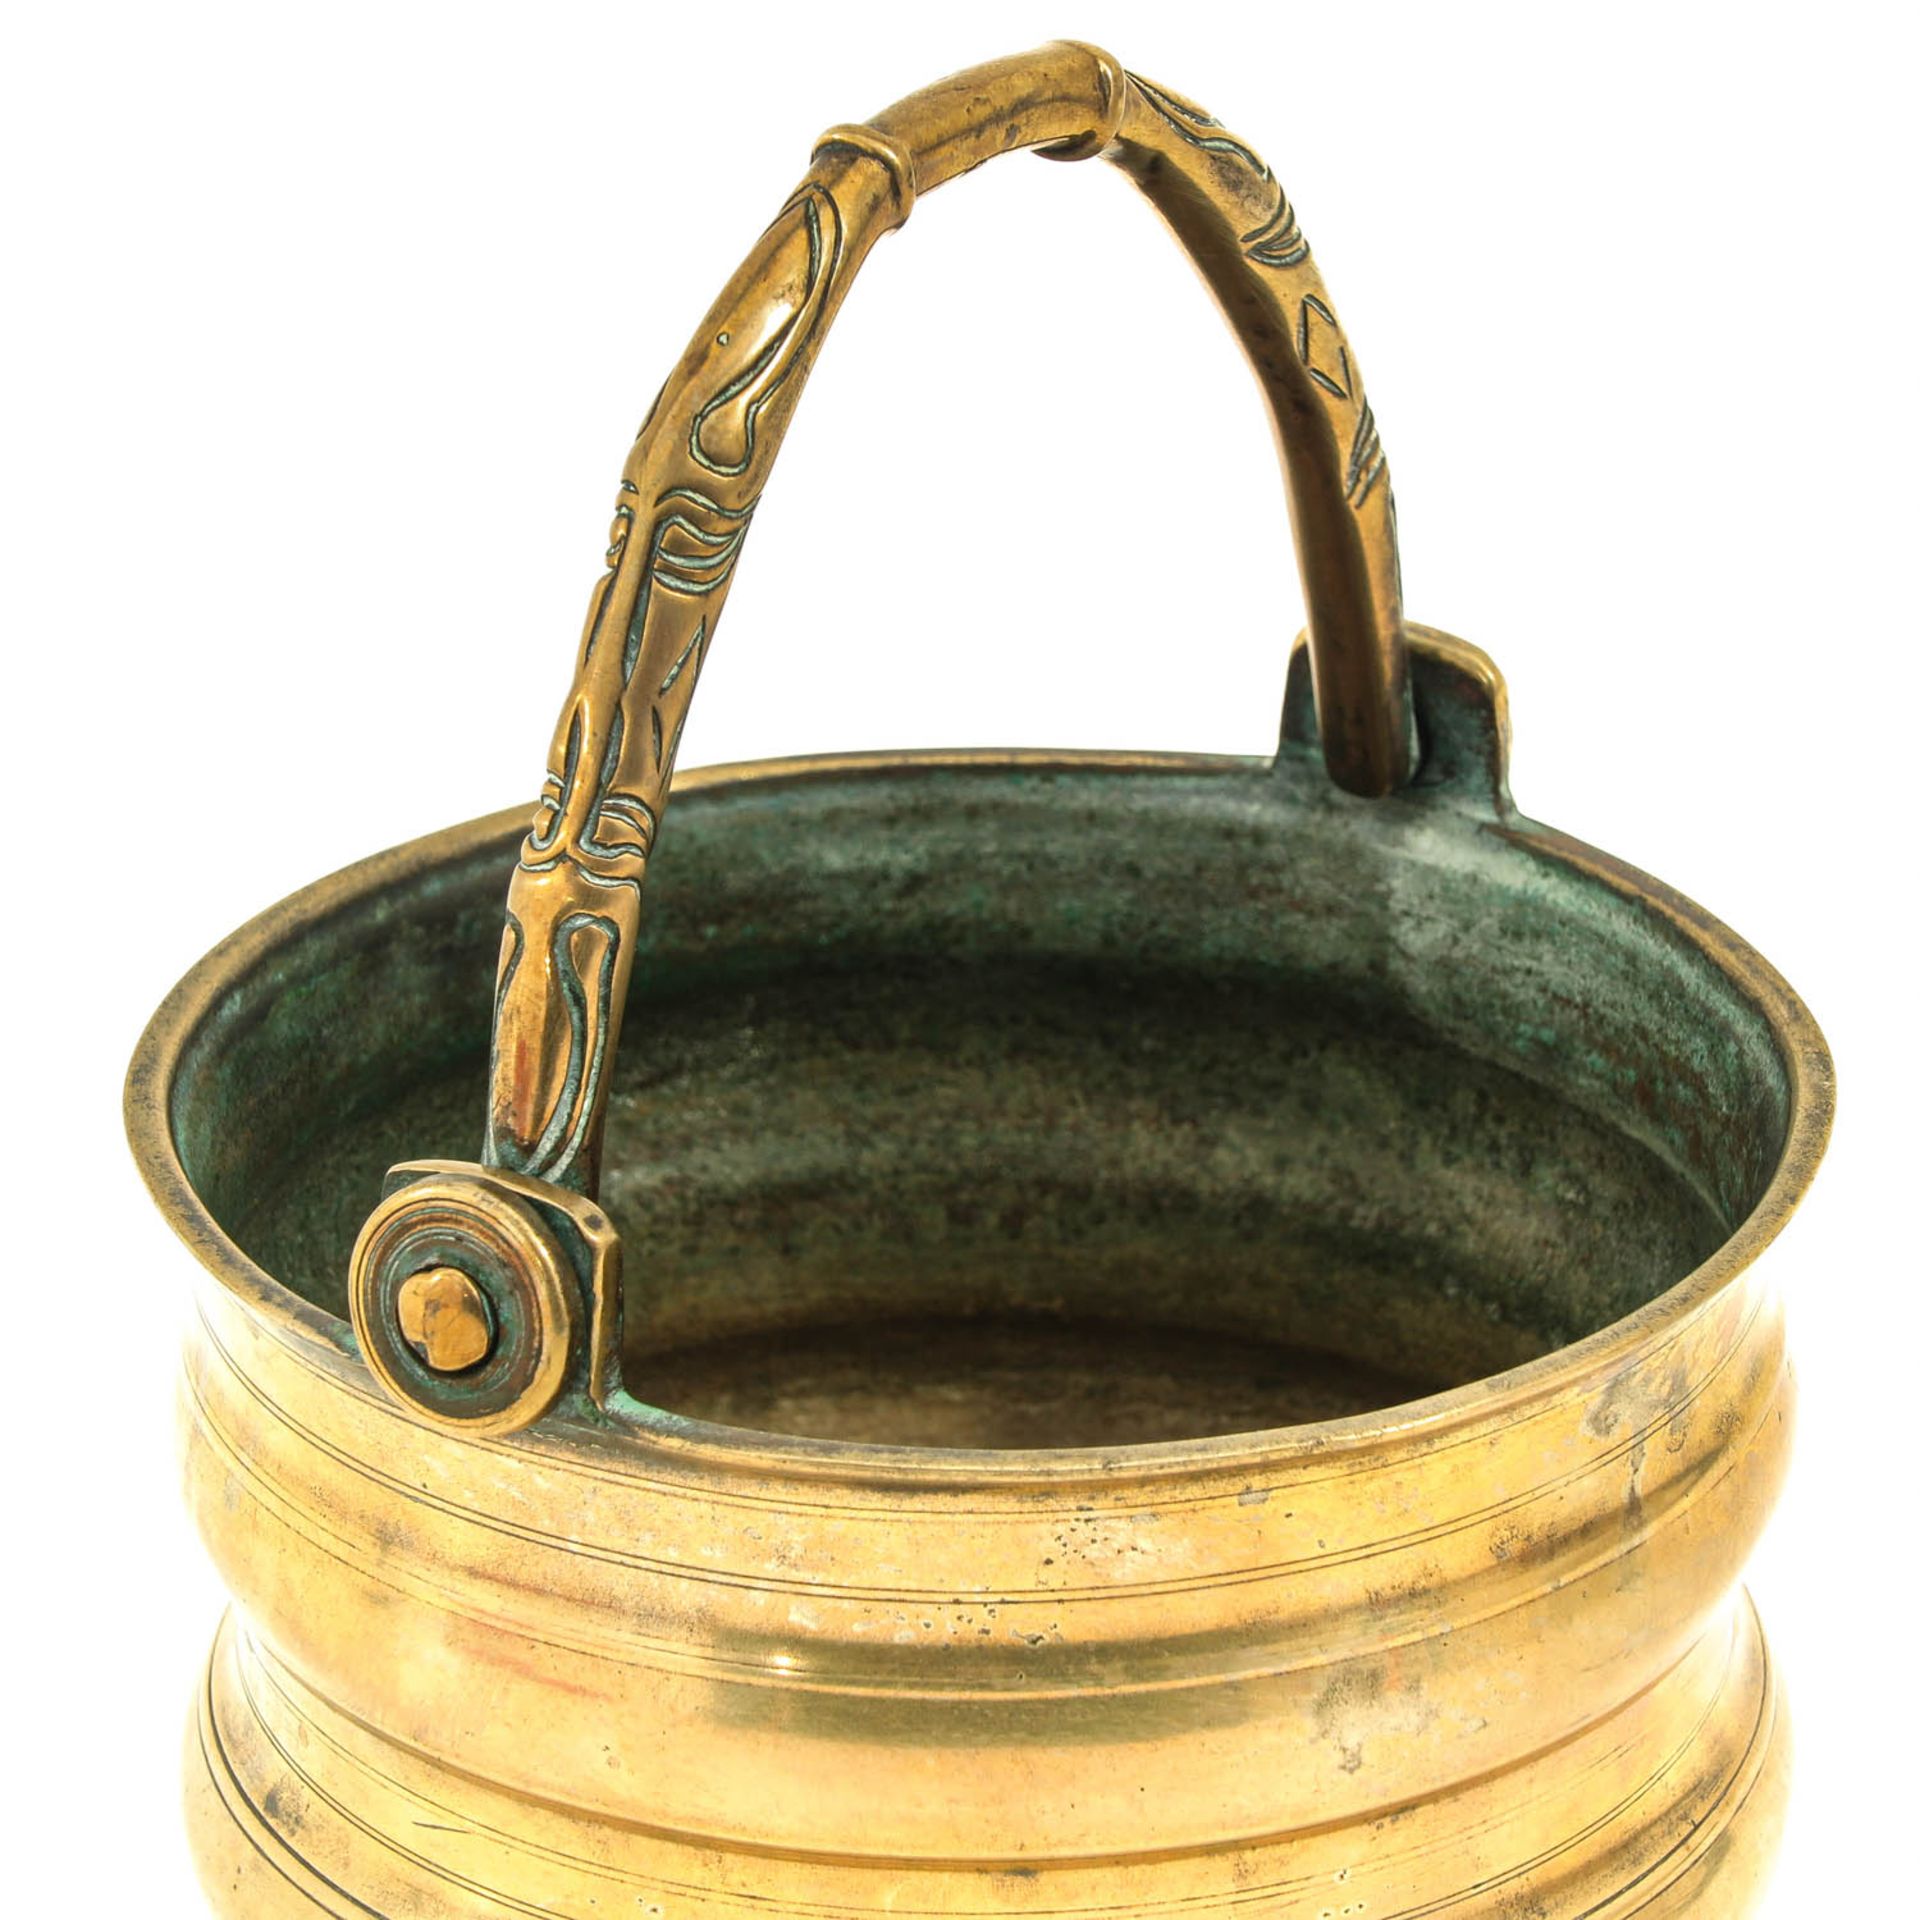 A 17th Bronze Bucket - Image 7 of 7